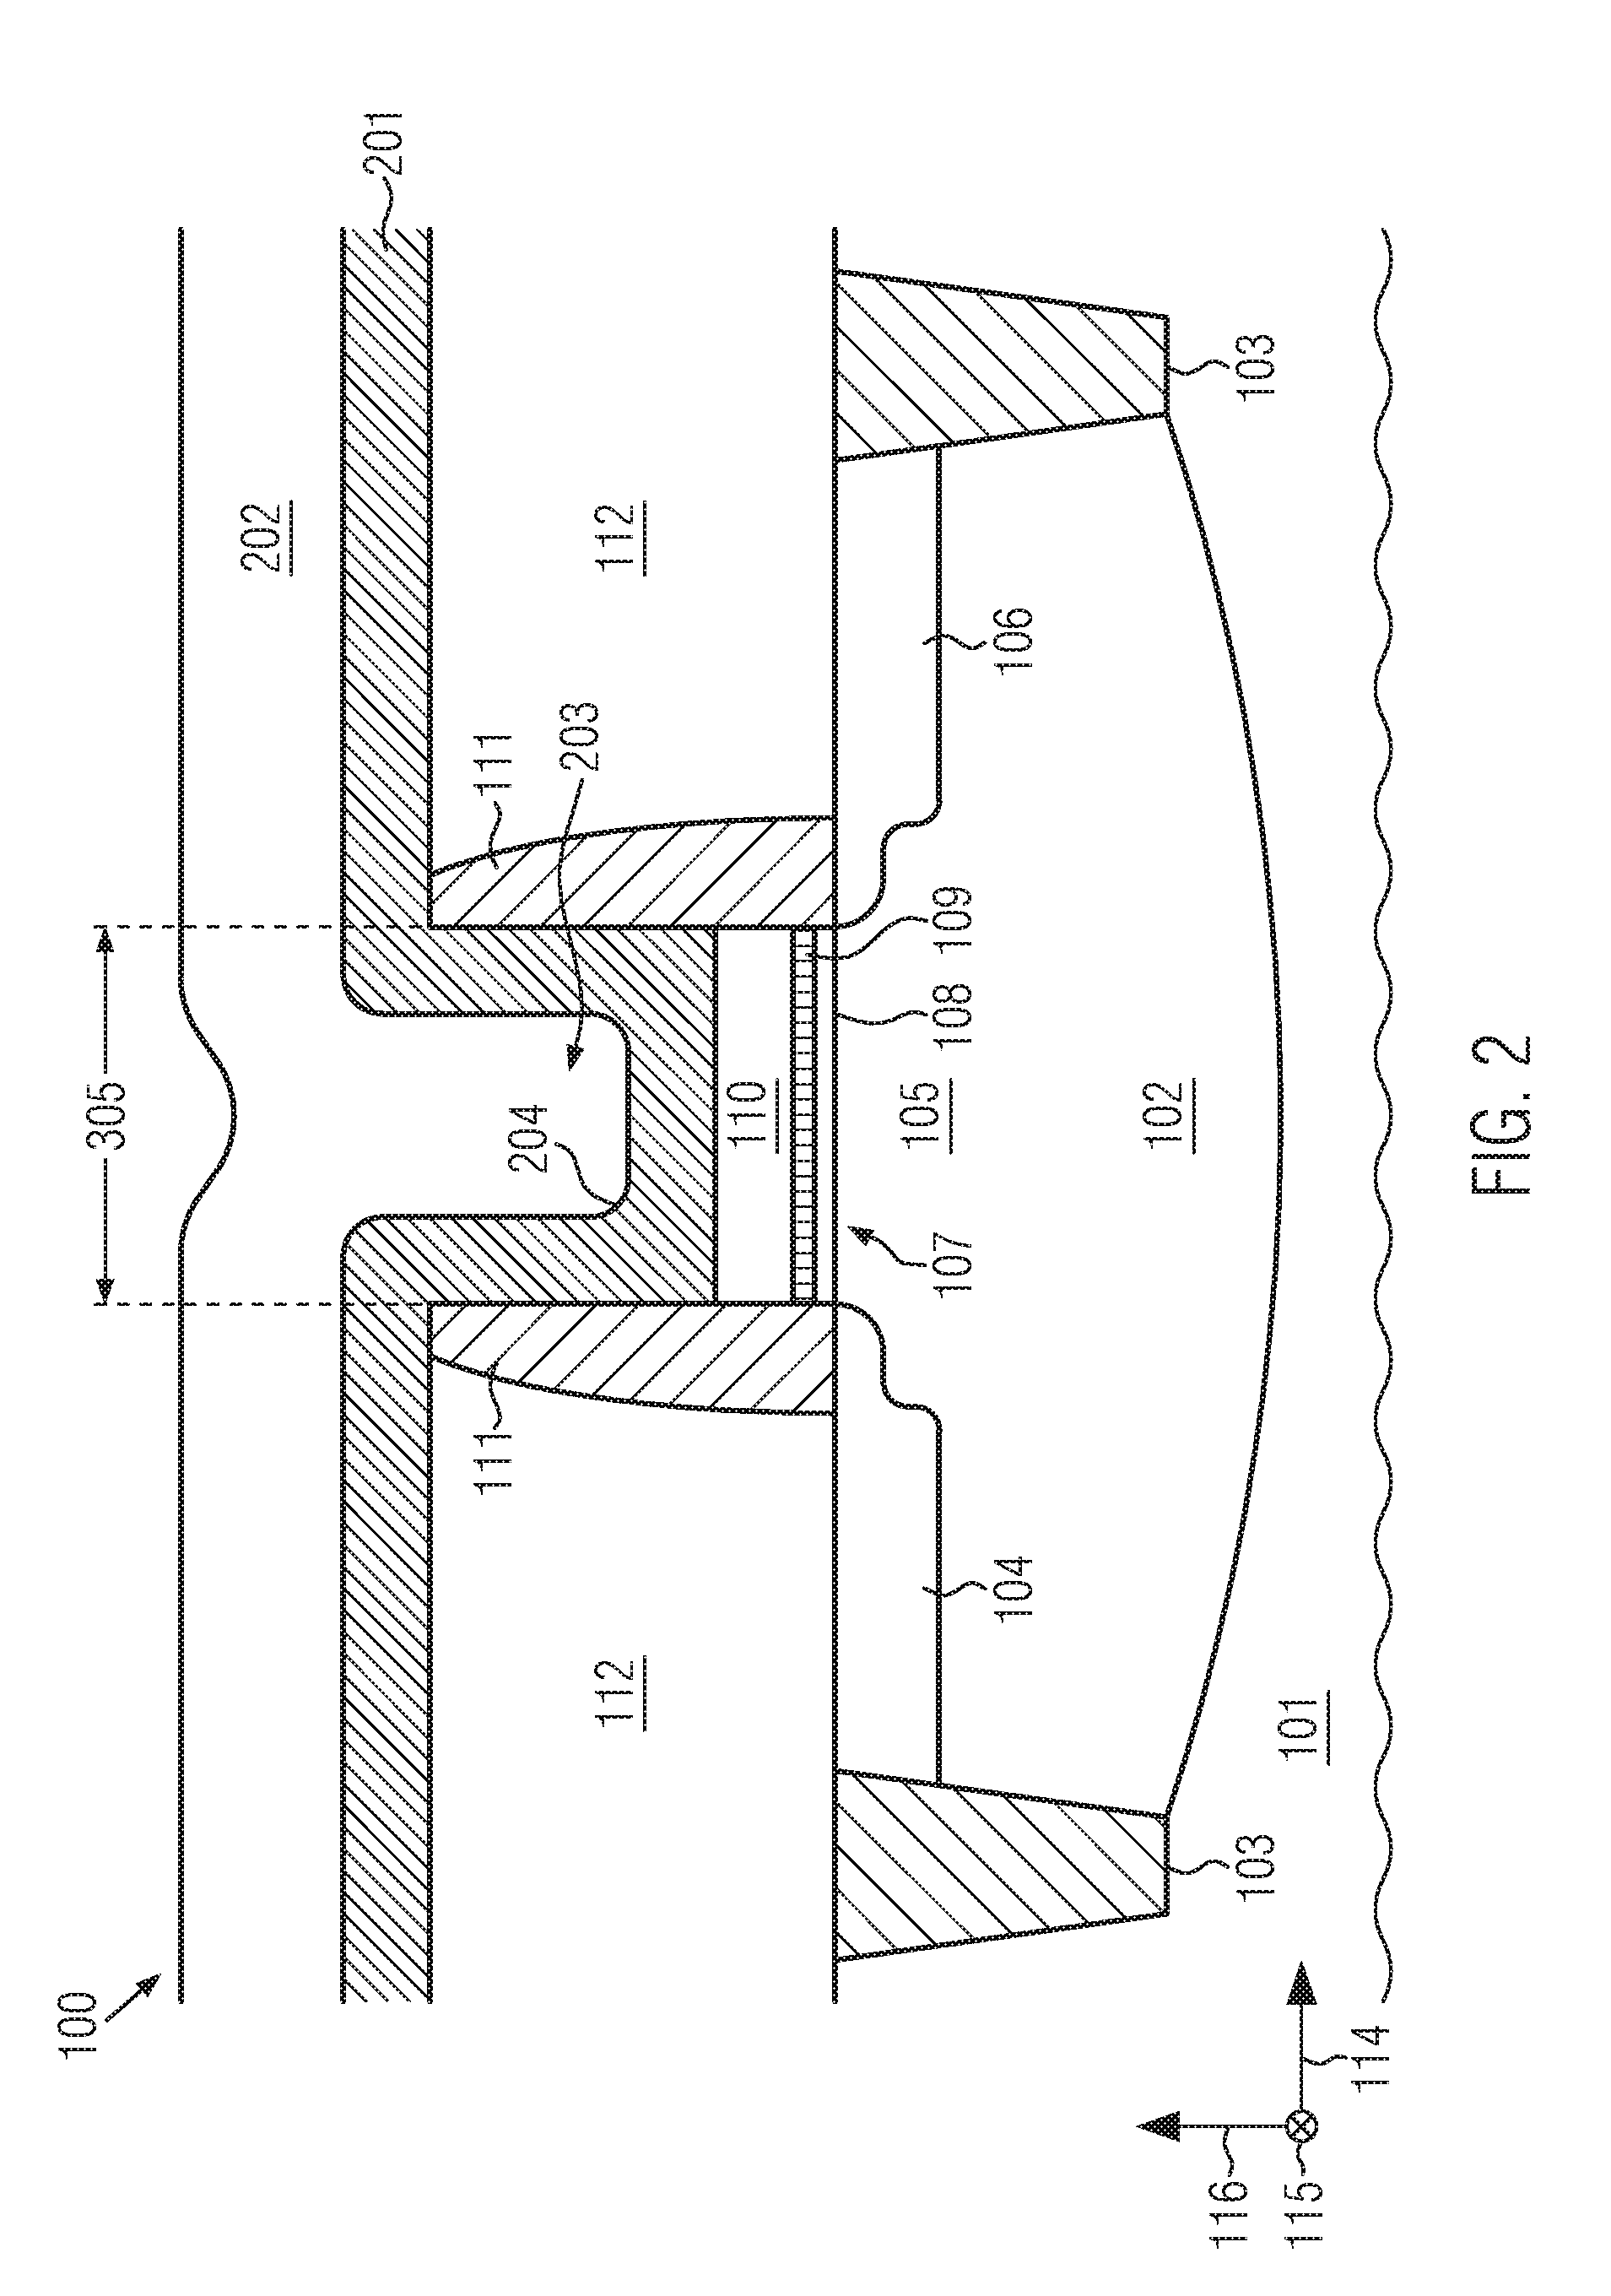 Method of forming a device including a floating gate electrode and a layer of ferroelectric material